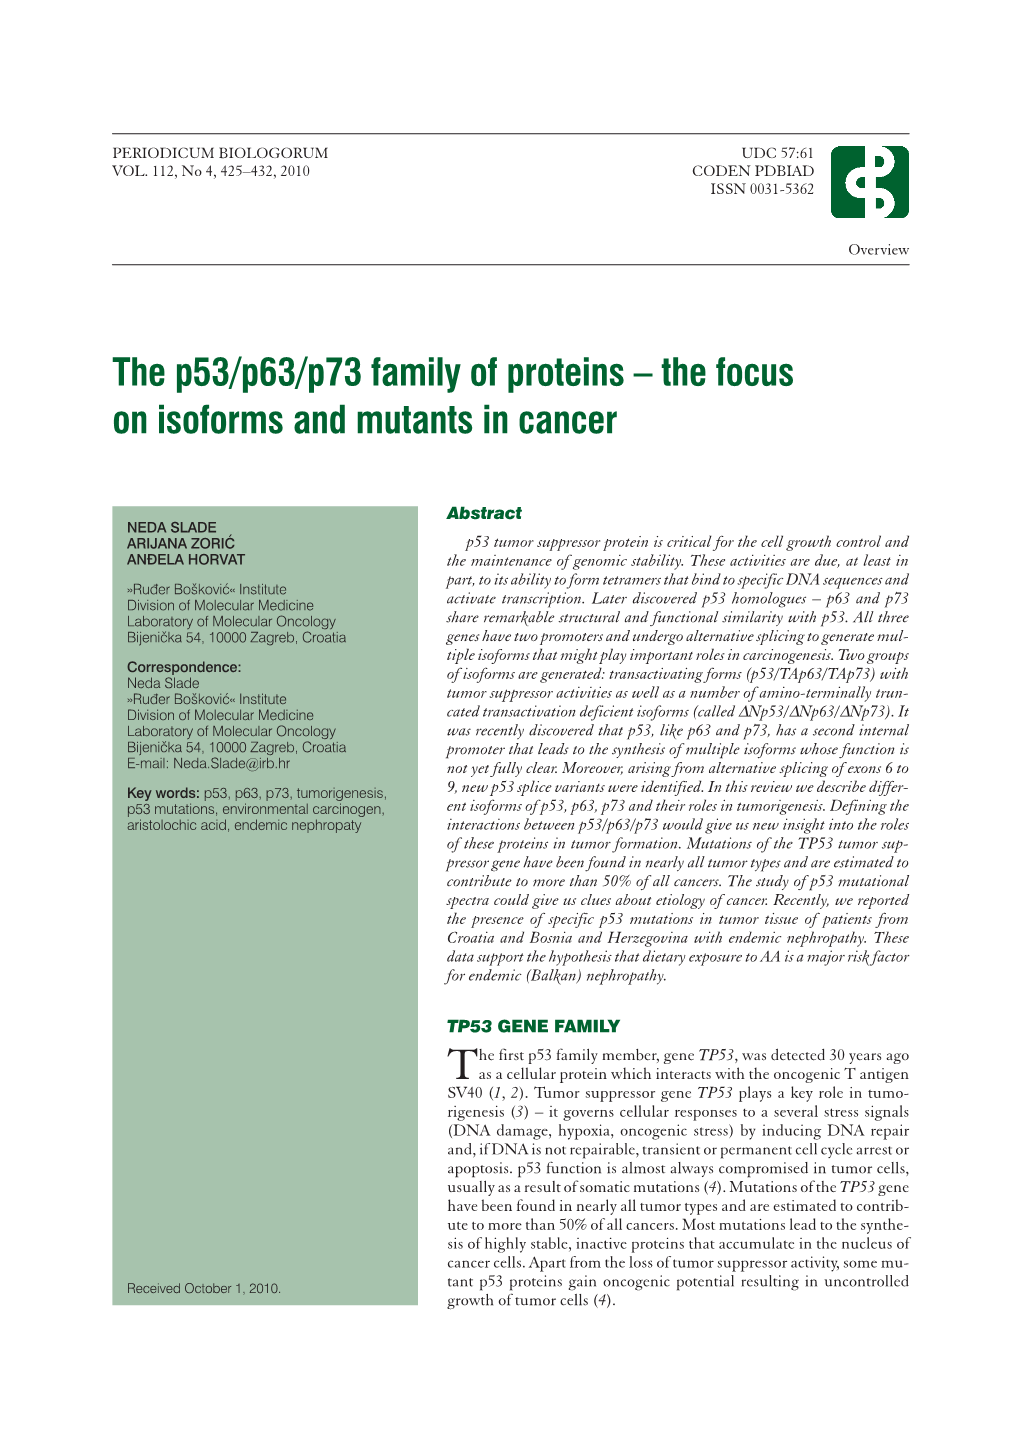 The P53/P63/P73 Family of Proteins – the Focus on Isoforms and Mutants in Cancer